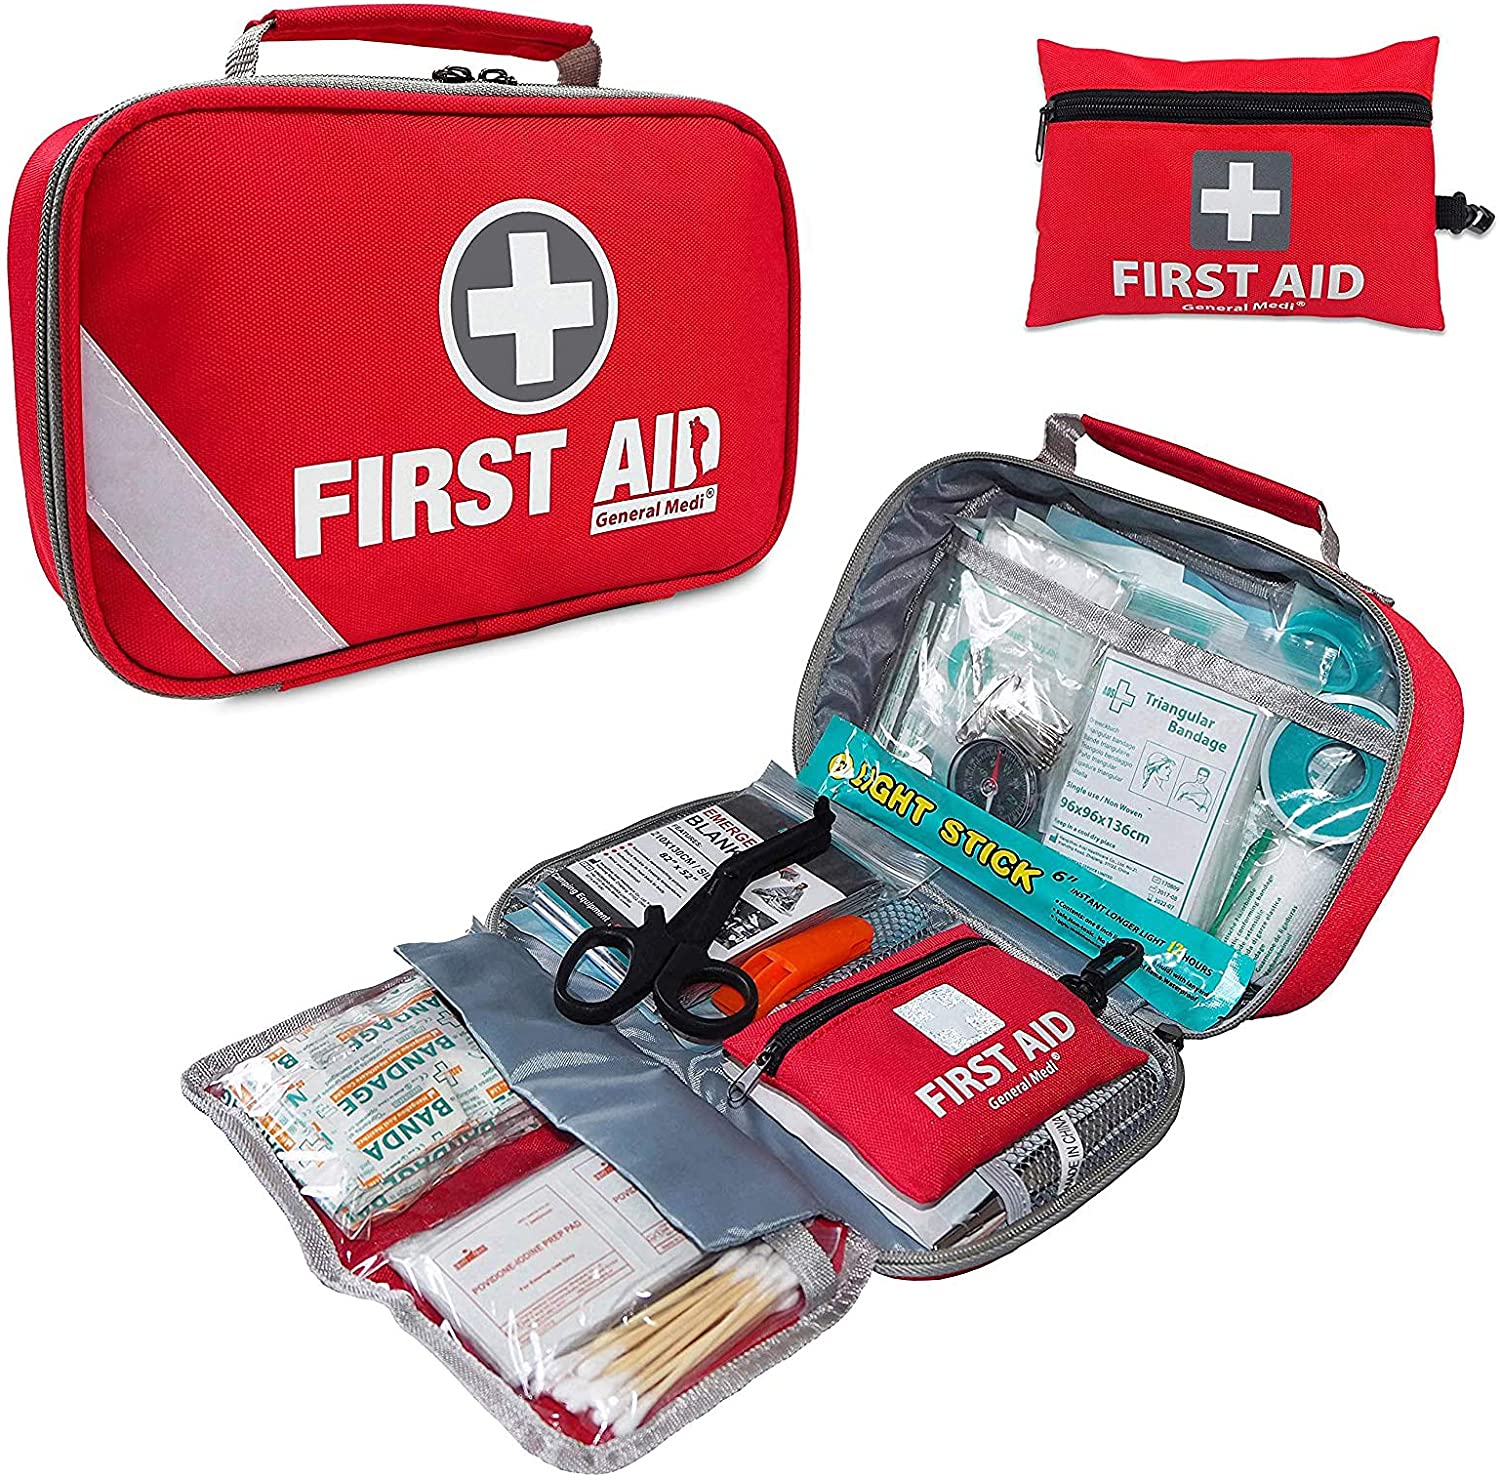 It Is Applicable To The Original First-aid Kit For All Models Of